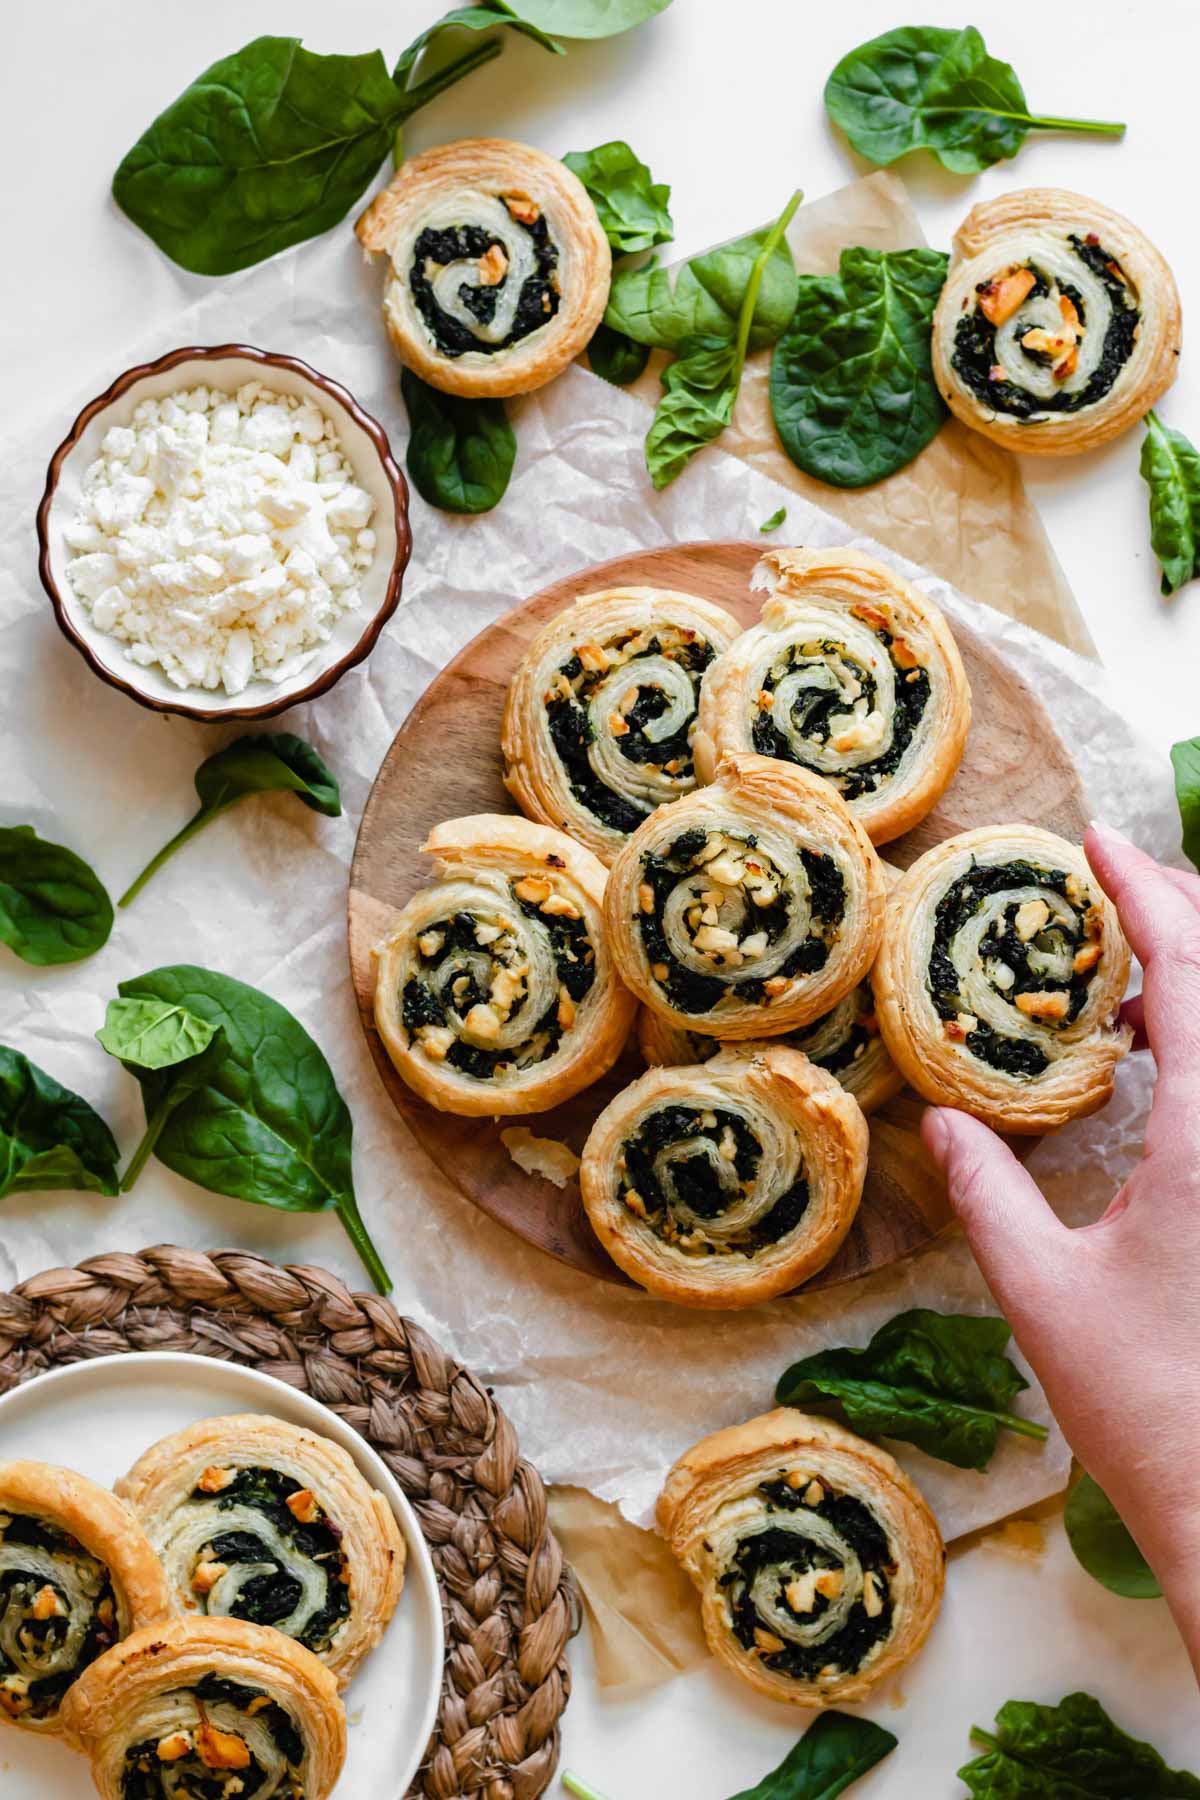 Spinach feta pinwheels layered on a plate. A hand reaches in.